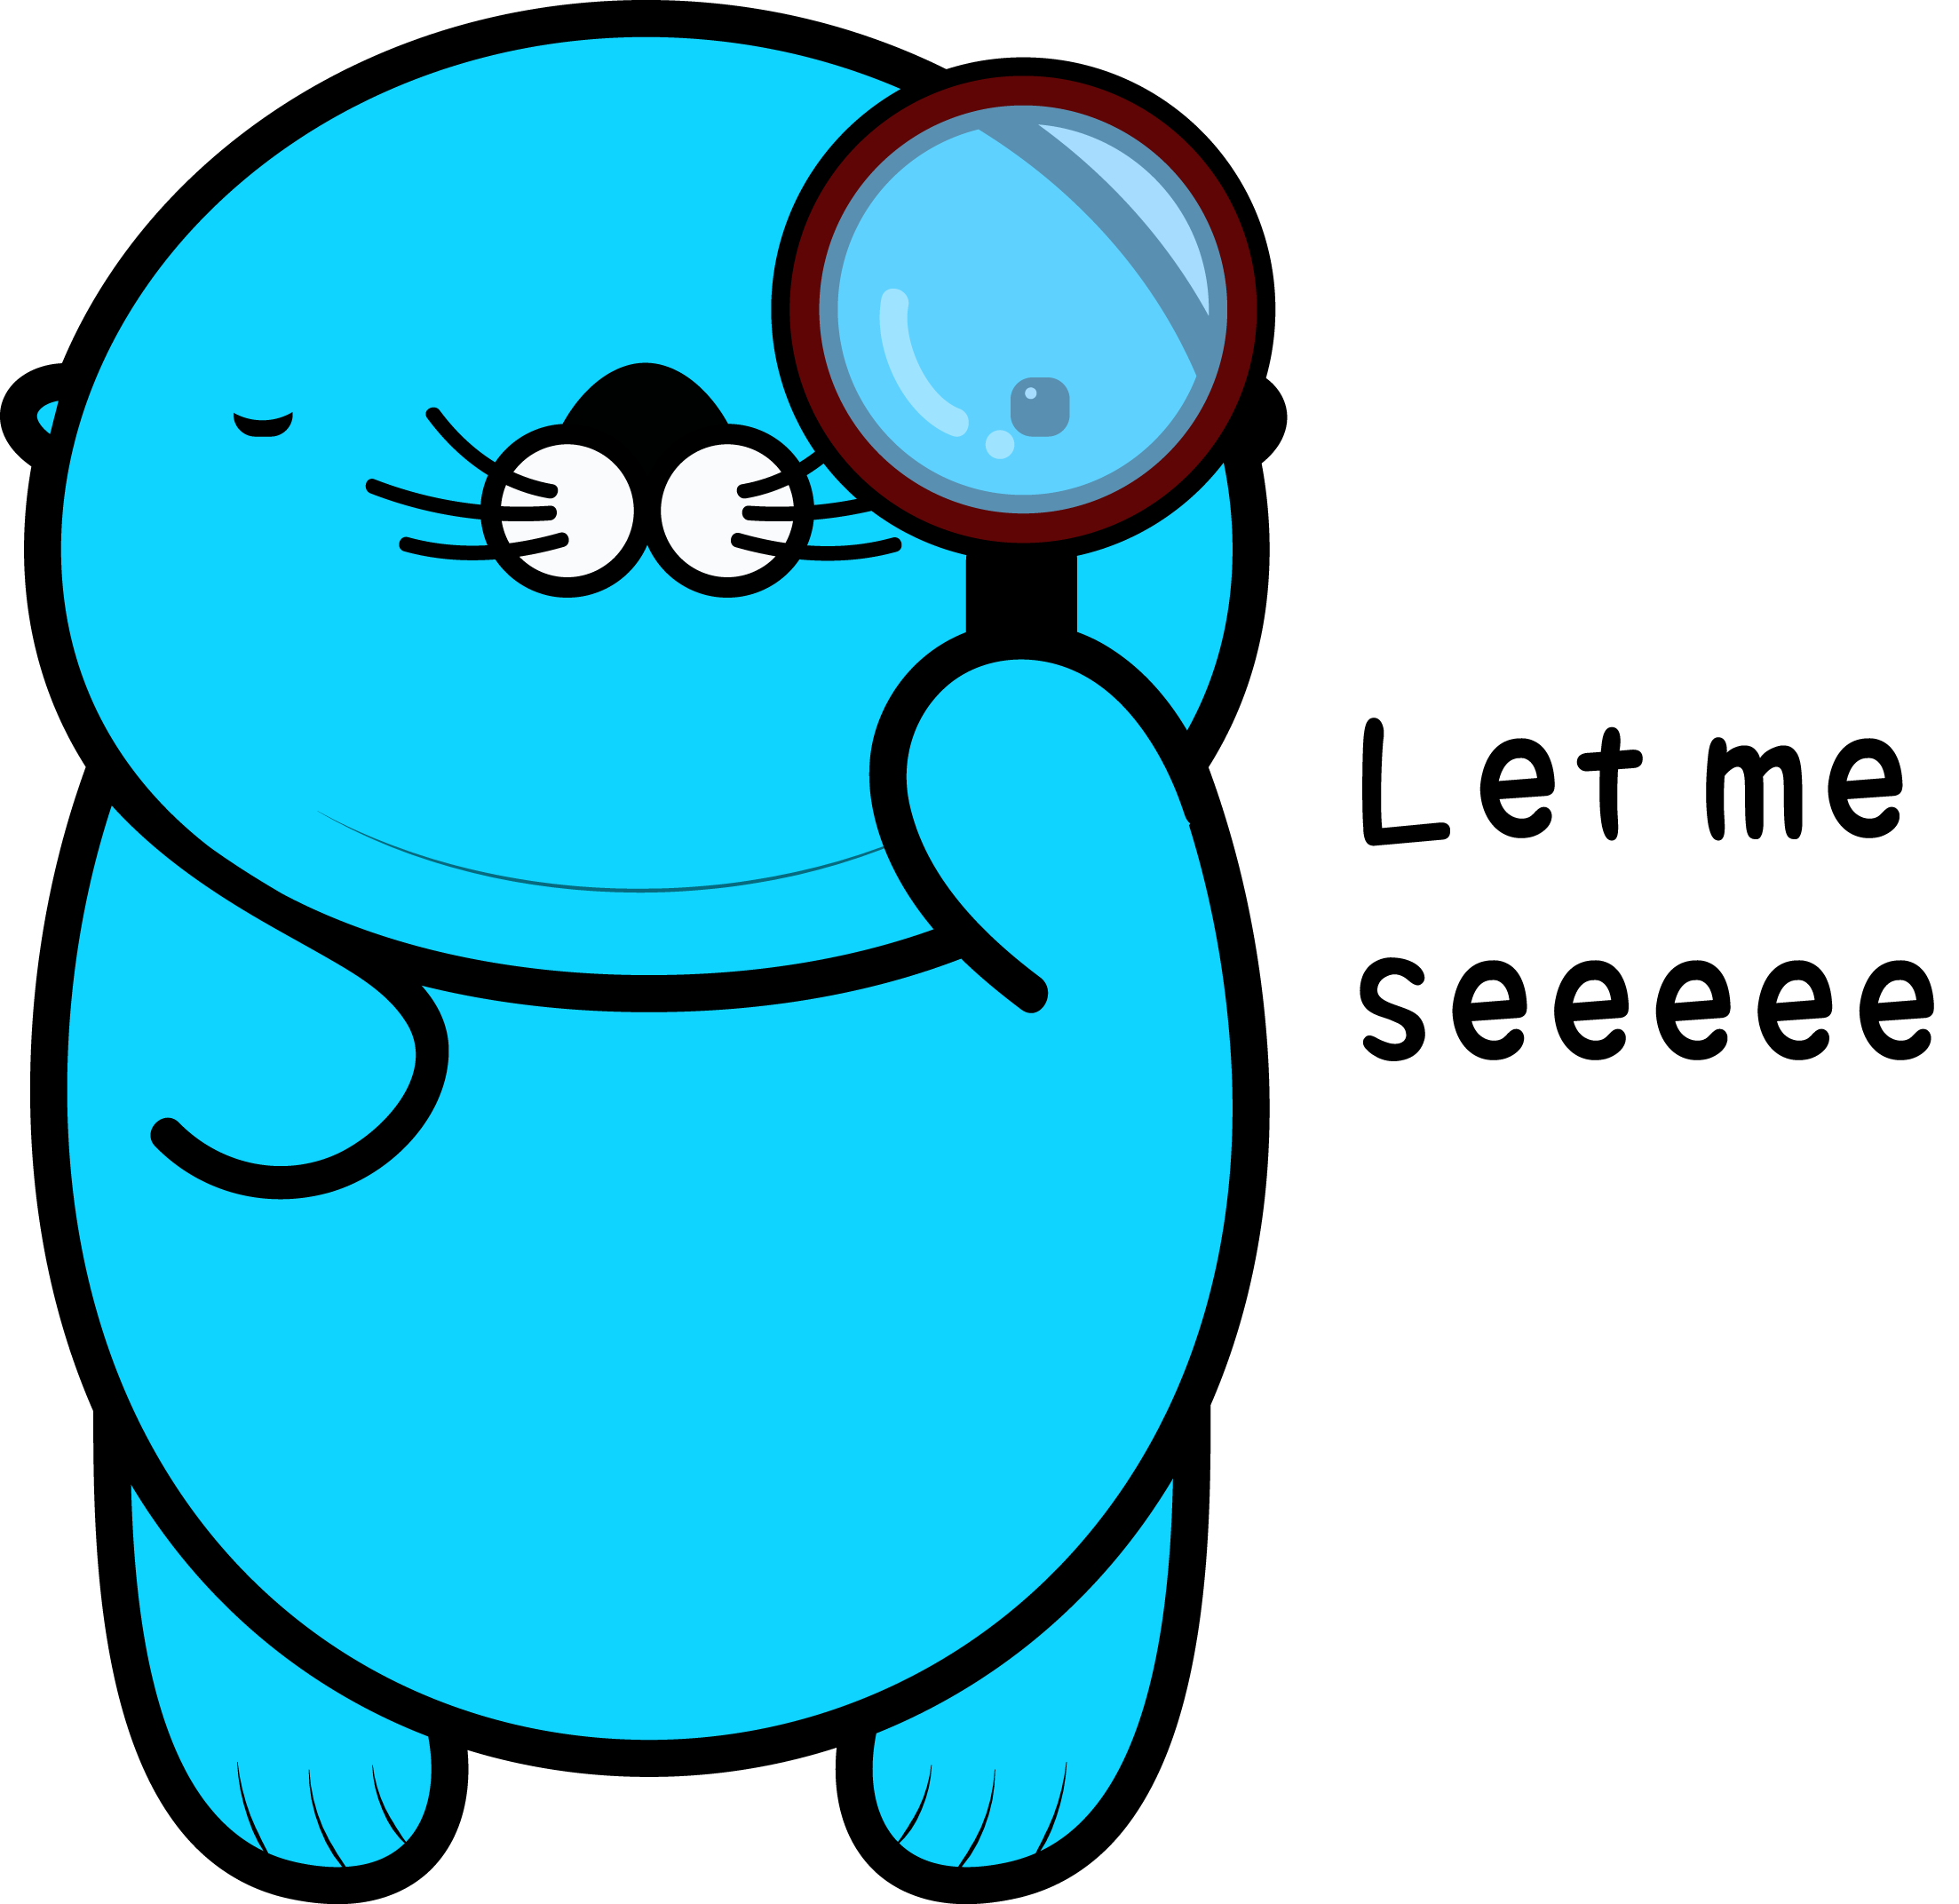 Richie, the mascot of Option Pool, is looking something closely with a magnifying glass